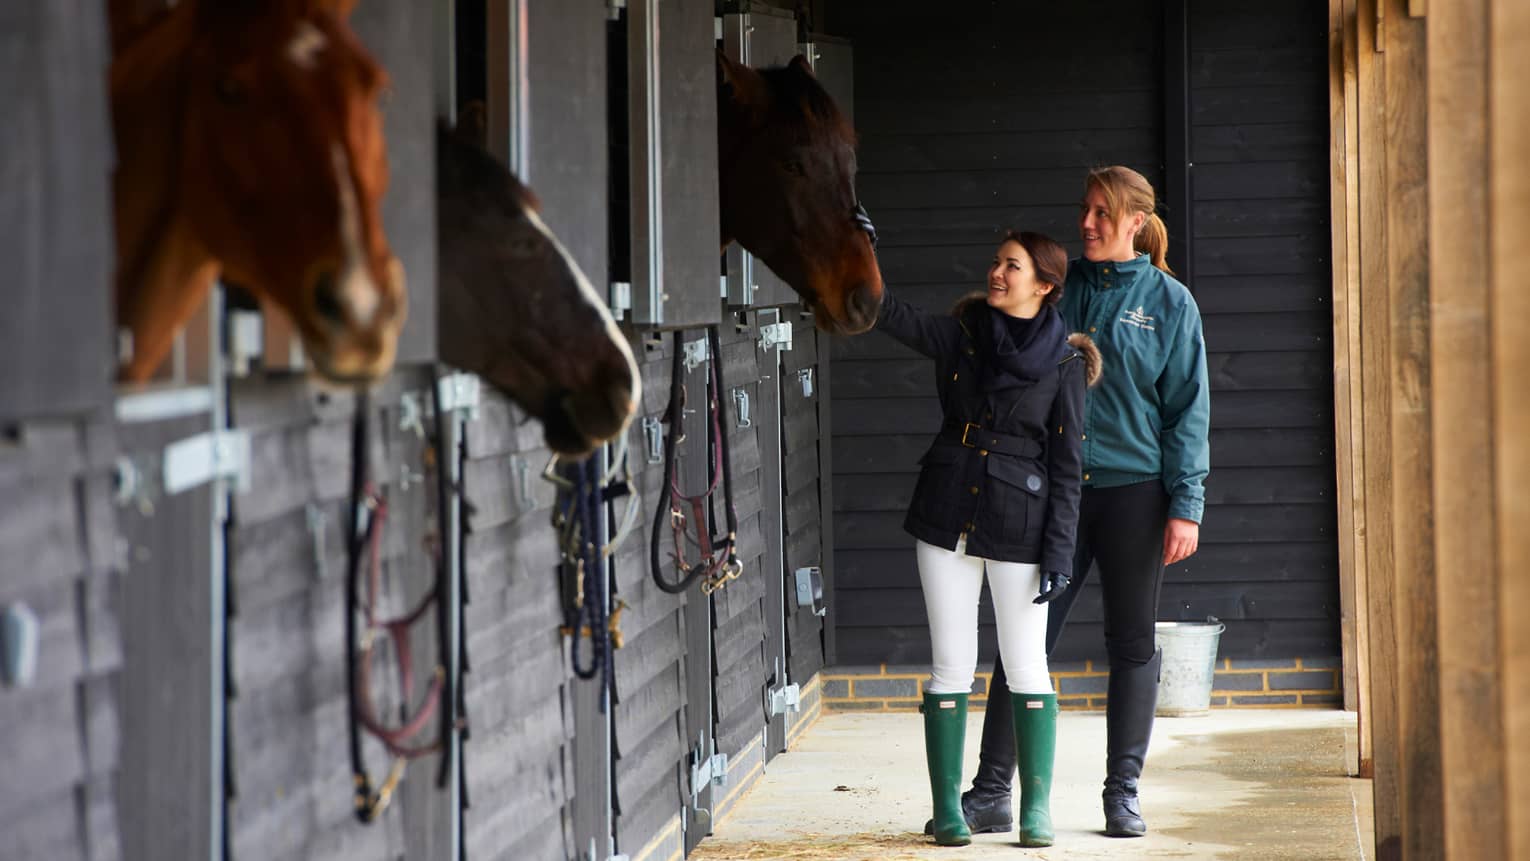 Two people visit with horses in stalls at The Dogmersfield Park Estate